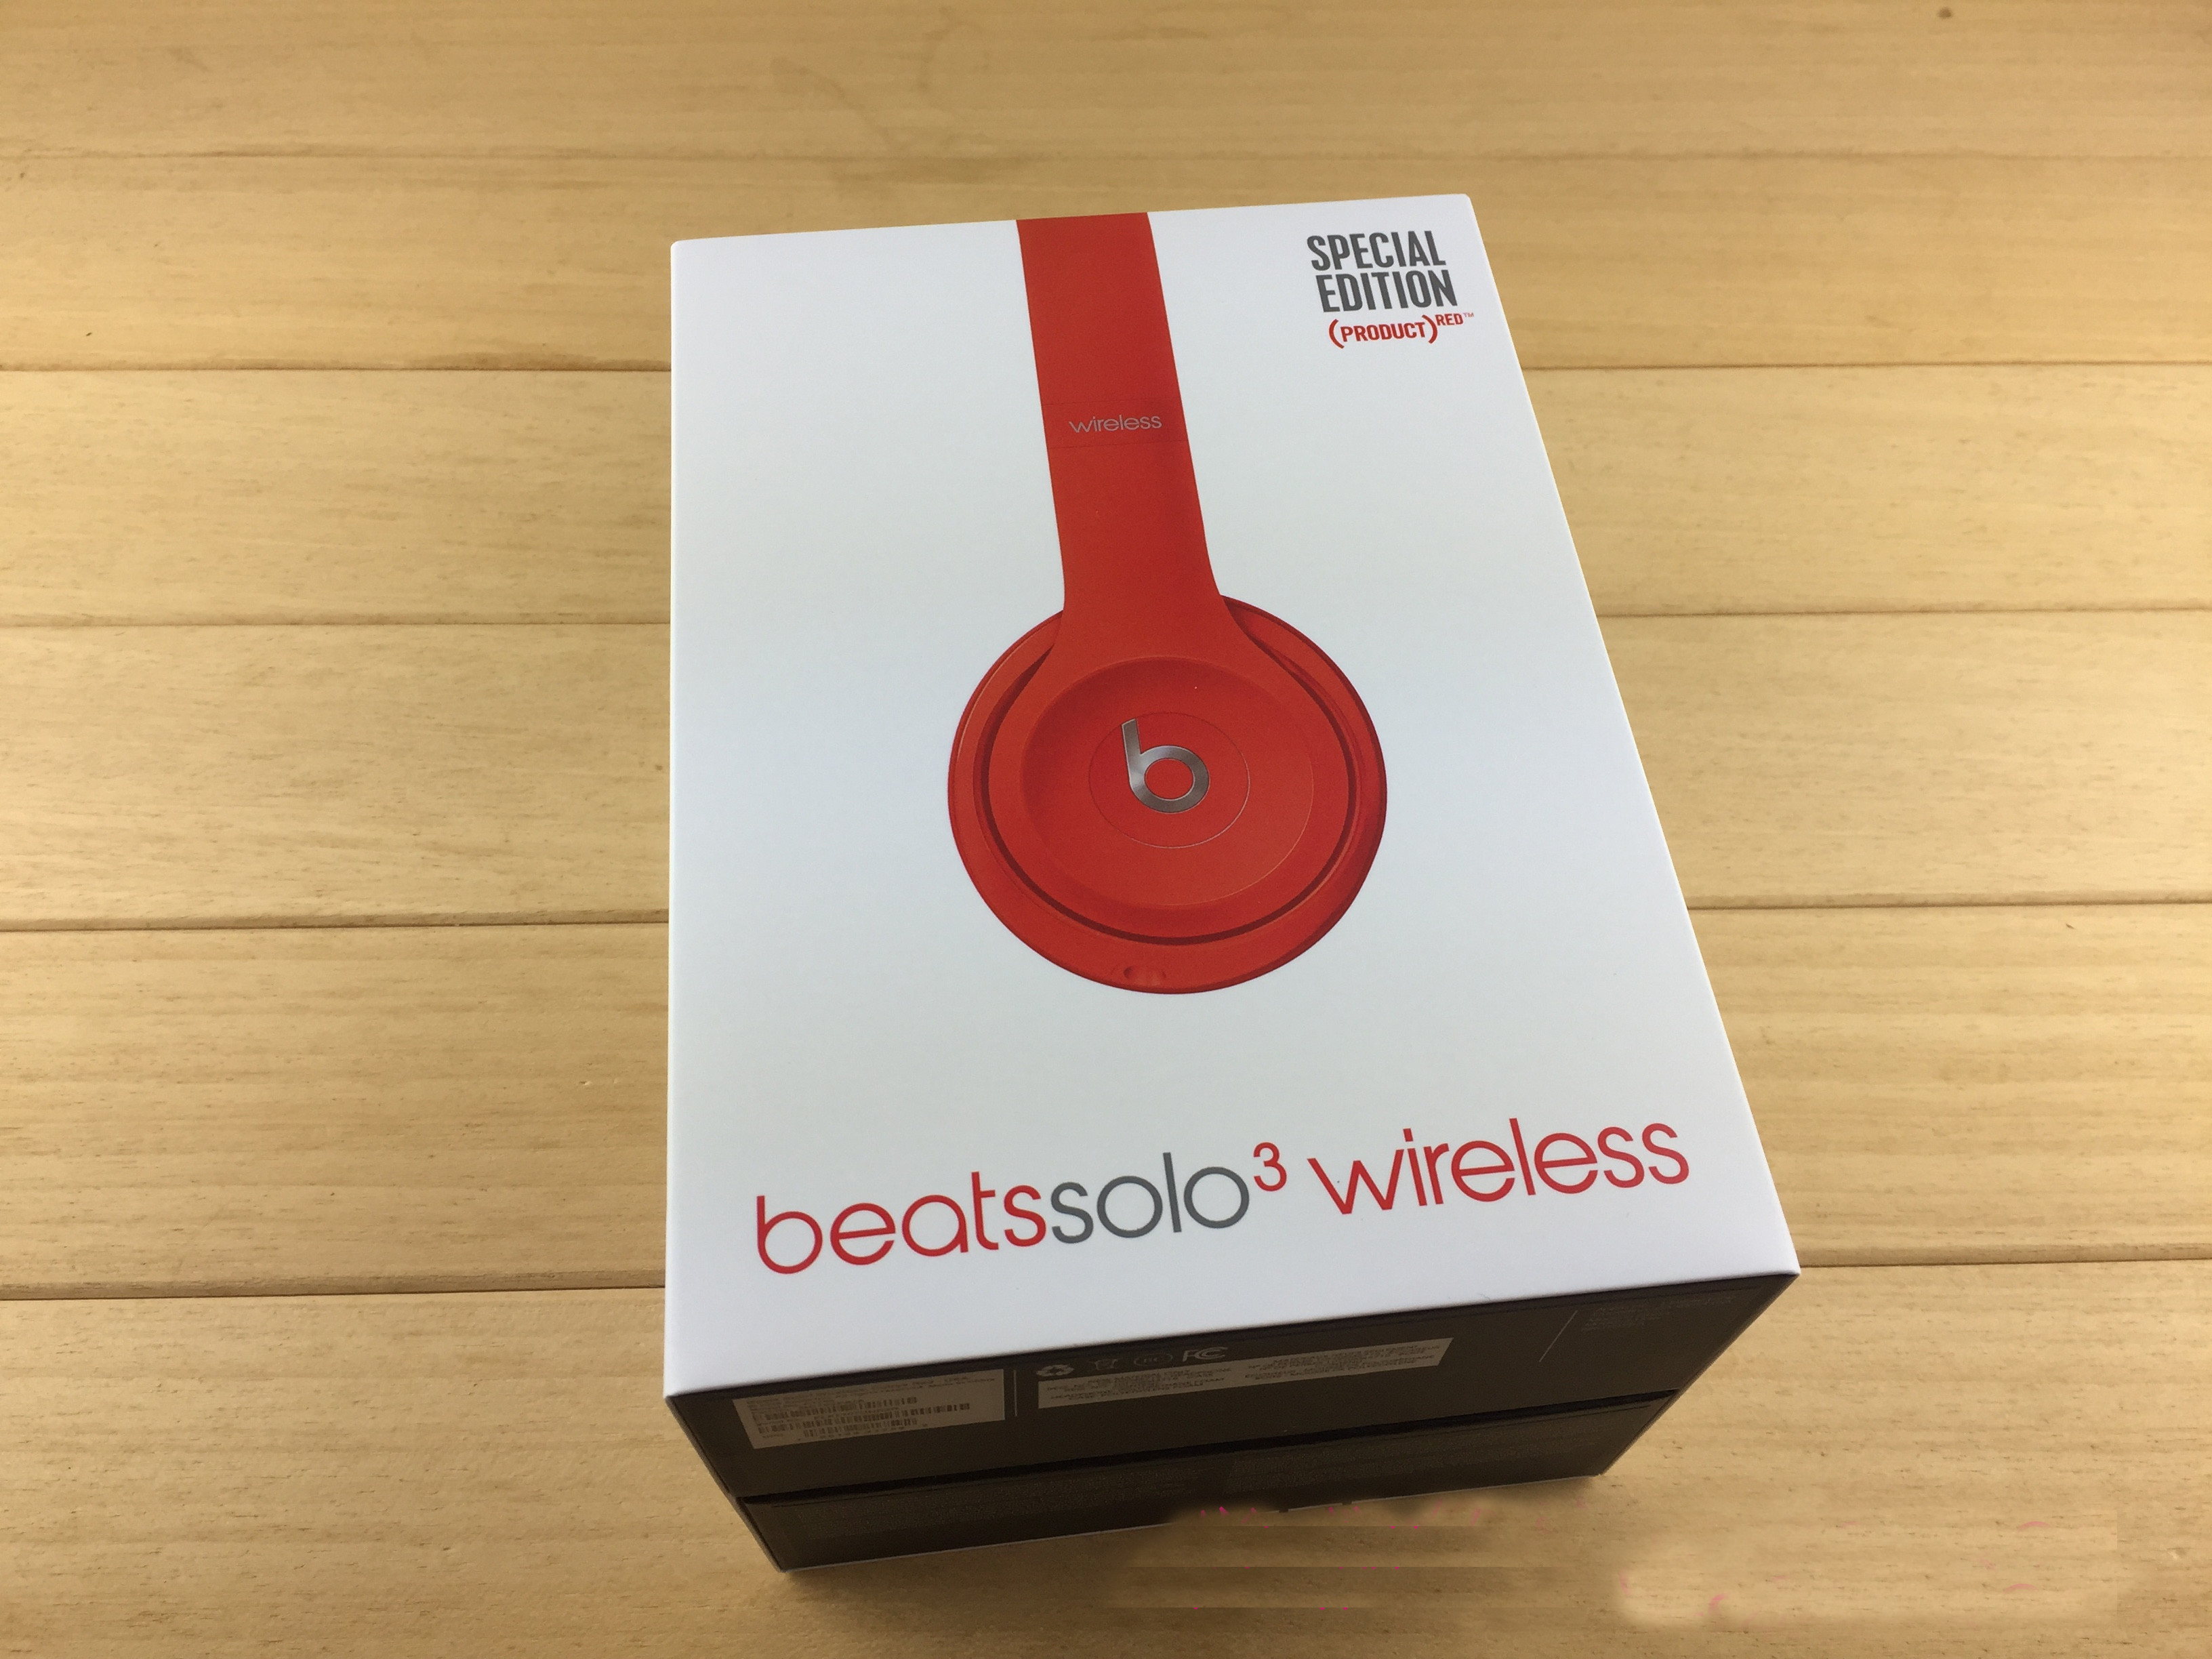 beats solo 3 wireless special edition red